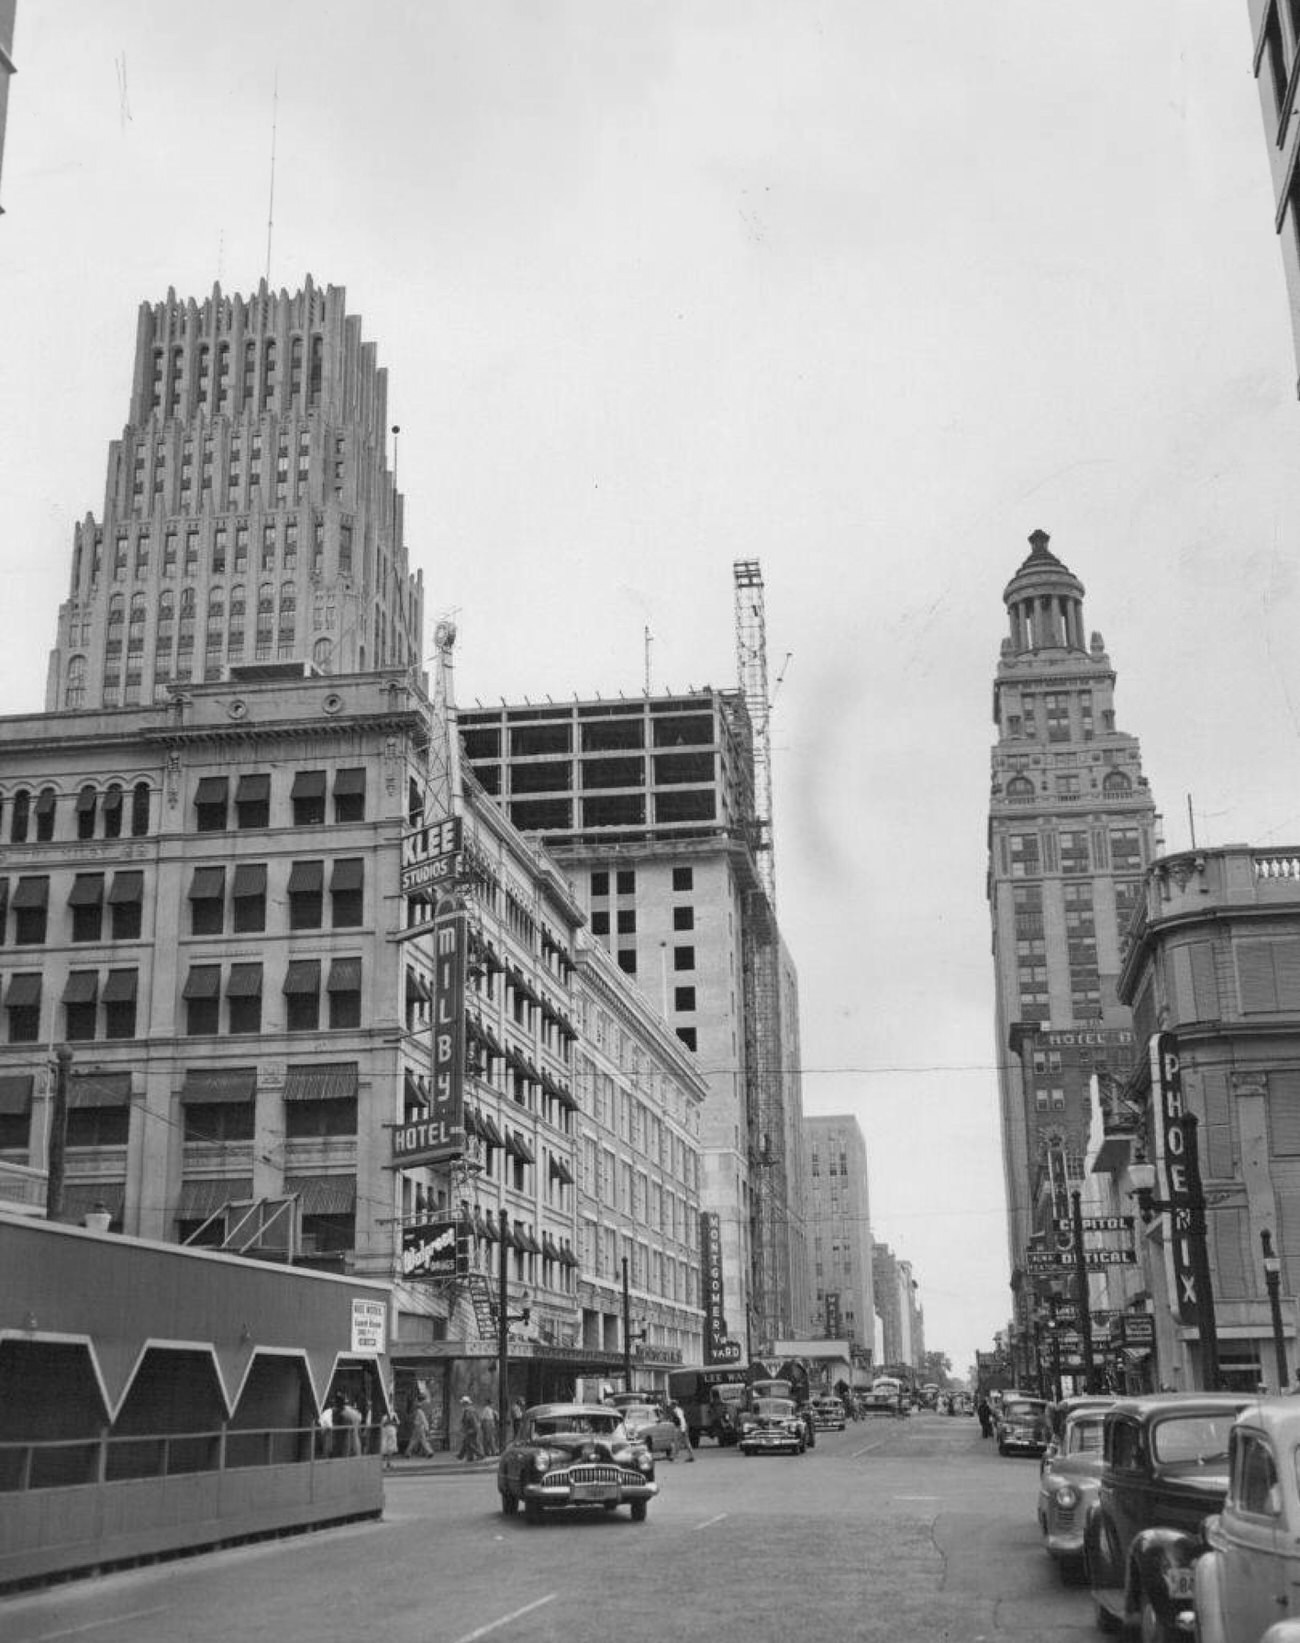 Downtown Houston's growth along Texas Avenue with new constructions, reflecting the expansion of the Rocky Mountain Empire, 1951.